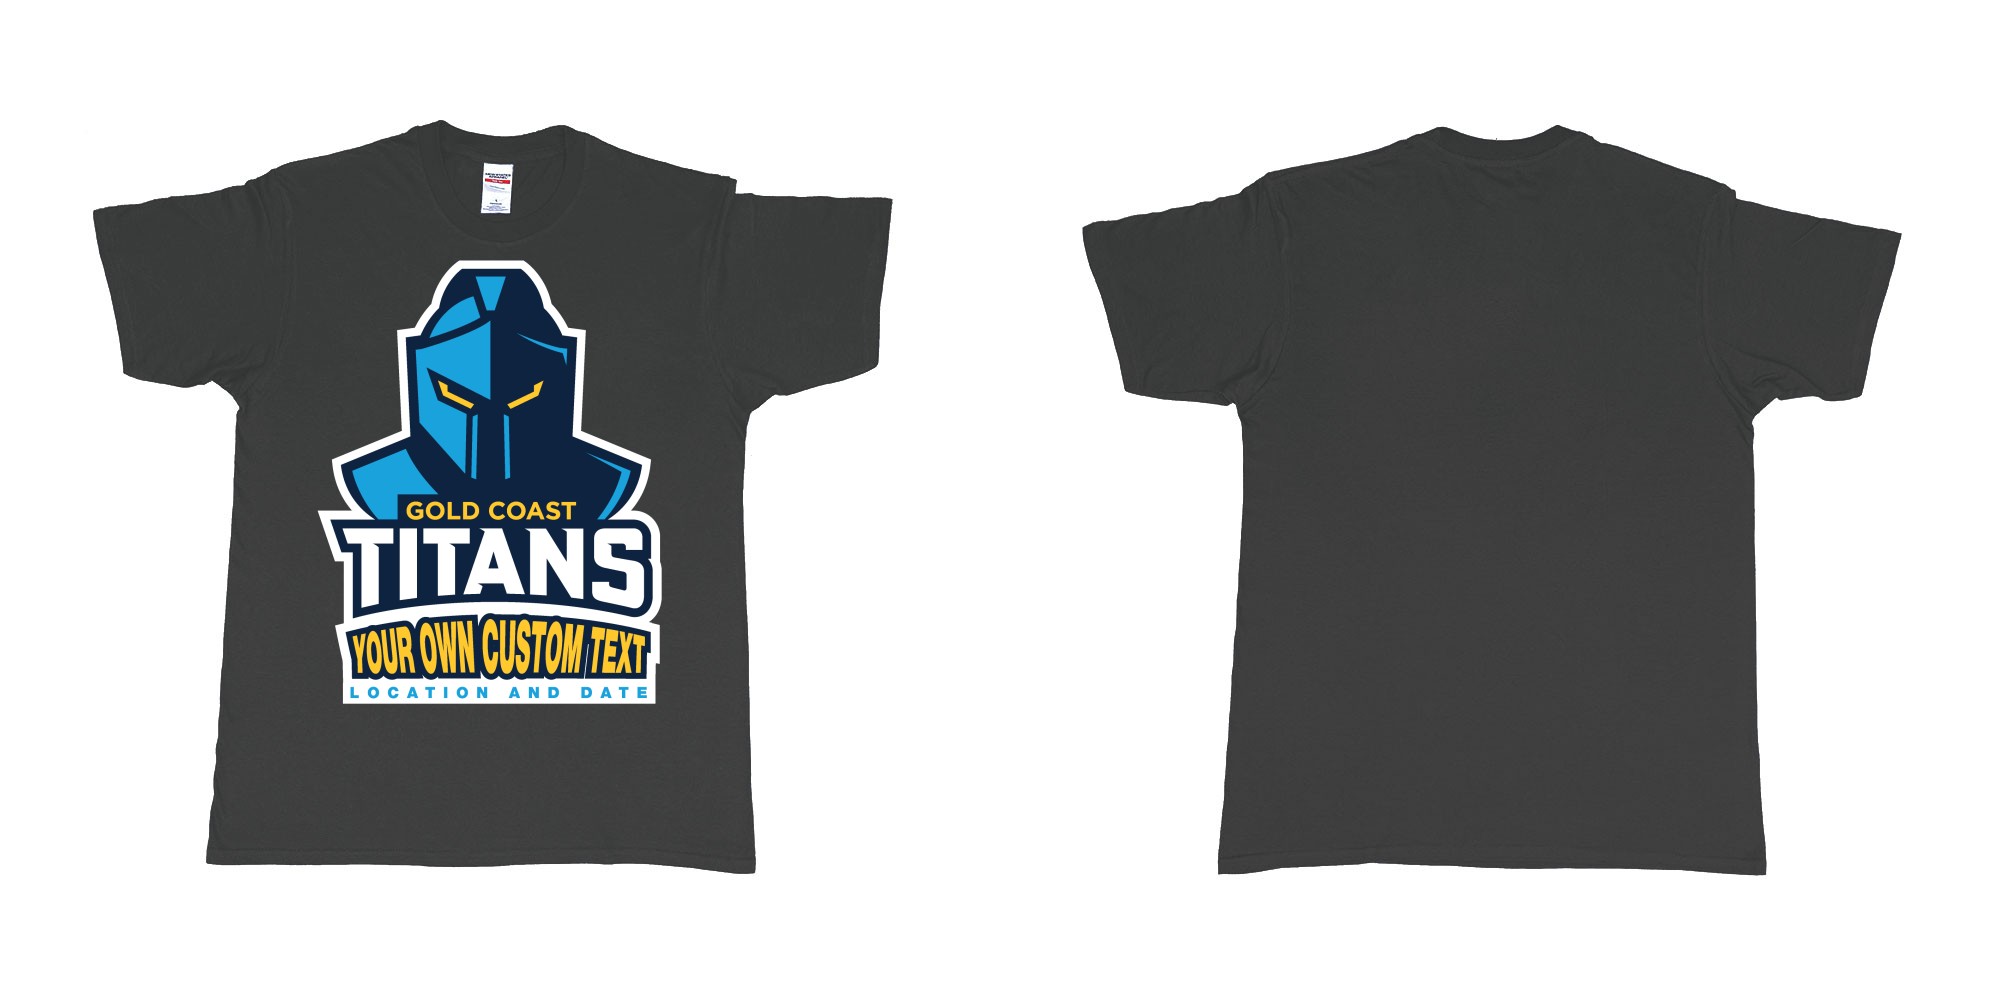 Custom tshirt design gold coast titans own custom design print in fabric color black choice your own text made in Bali by The Pirate Way